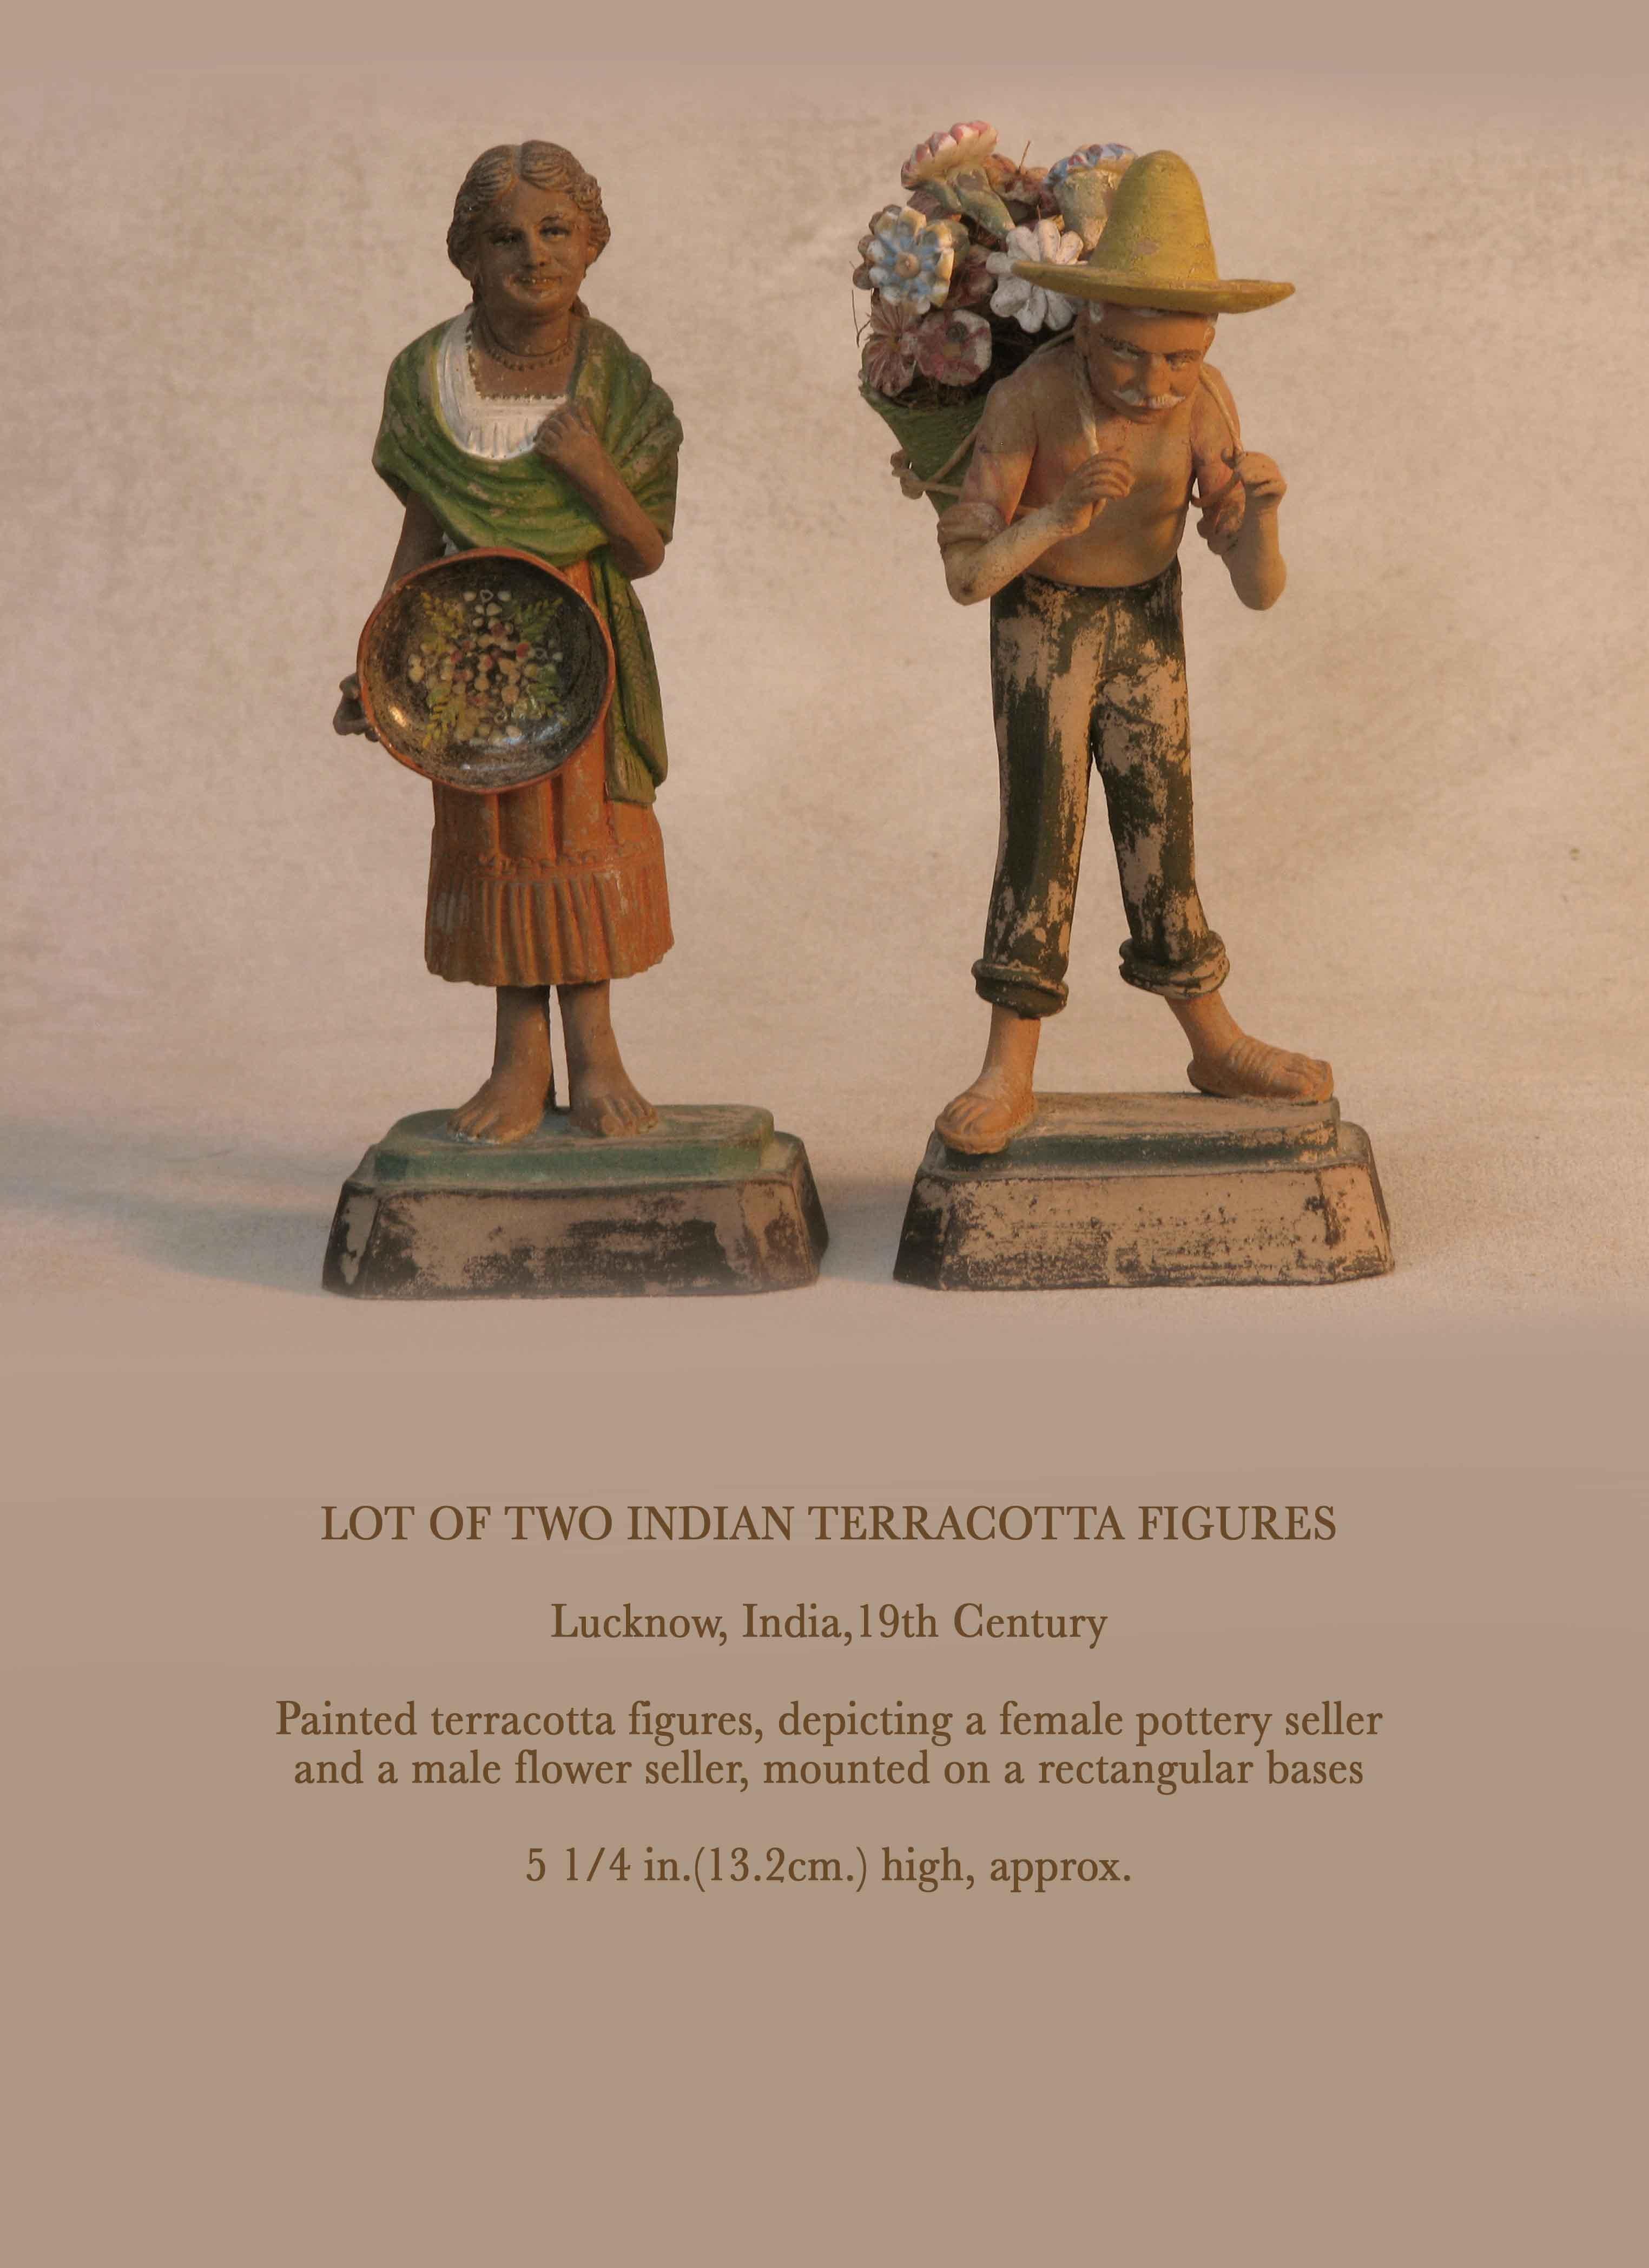 Lot of two Indian terracotta figures.

Lucknow, India, 19th Century.

Painted terracotta figures, depicting a female pottery seller
and a male flower seller, mounted on a rectangular bases.

Measure 5 1/4